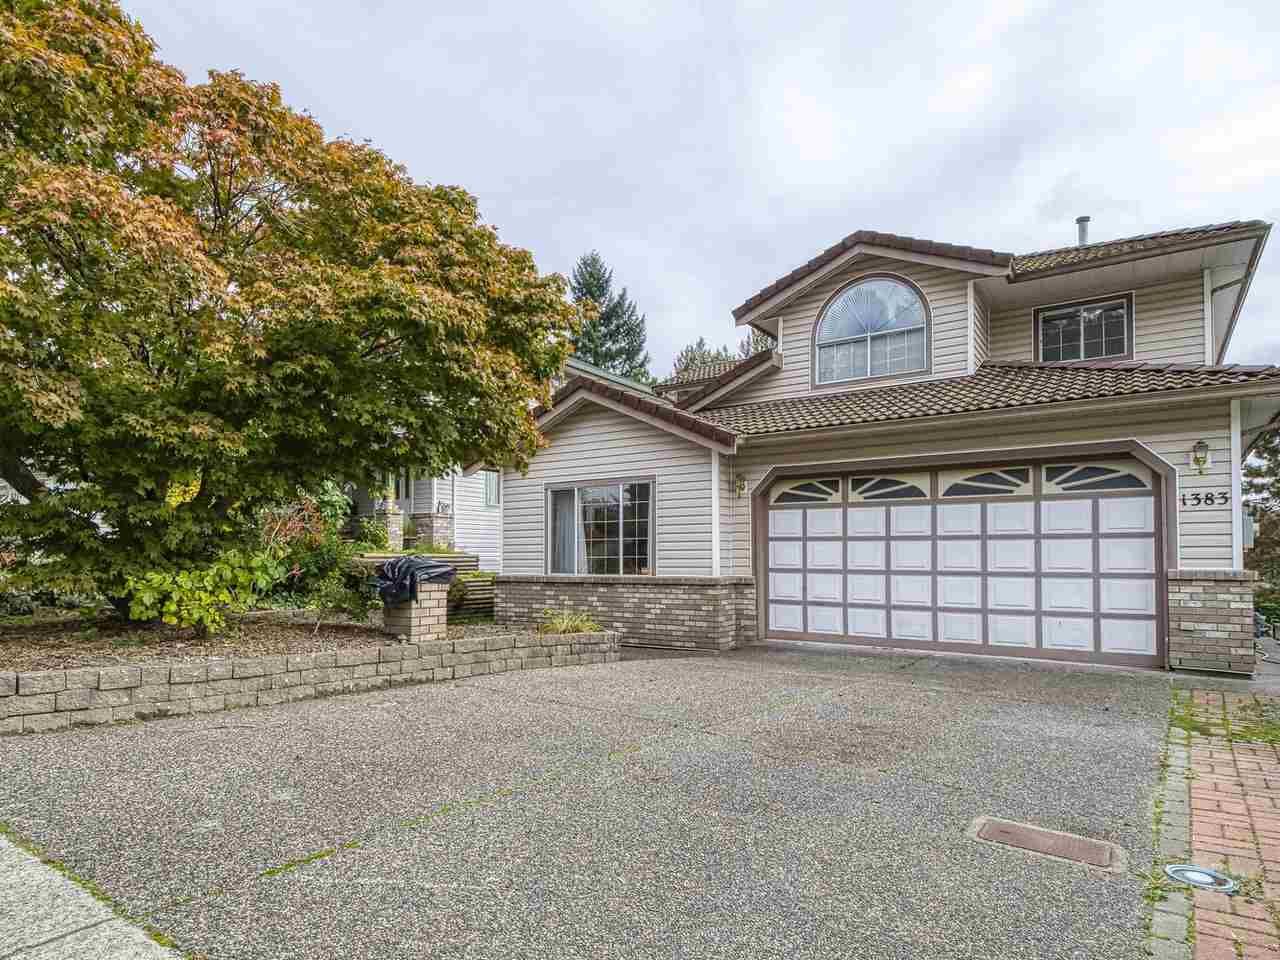 Main Photo: 1383 KENNEY Street in Coquitlam: Westwood Plateau House for sale : MLS®# R2408876